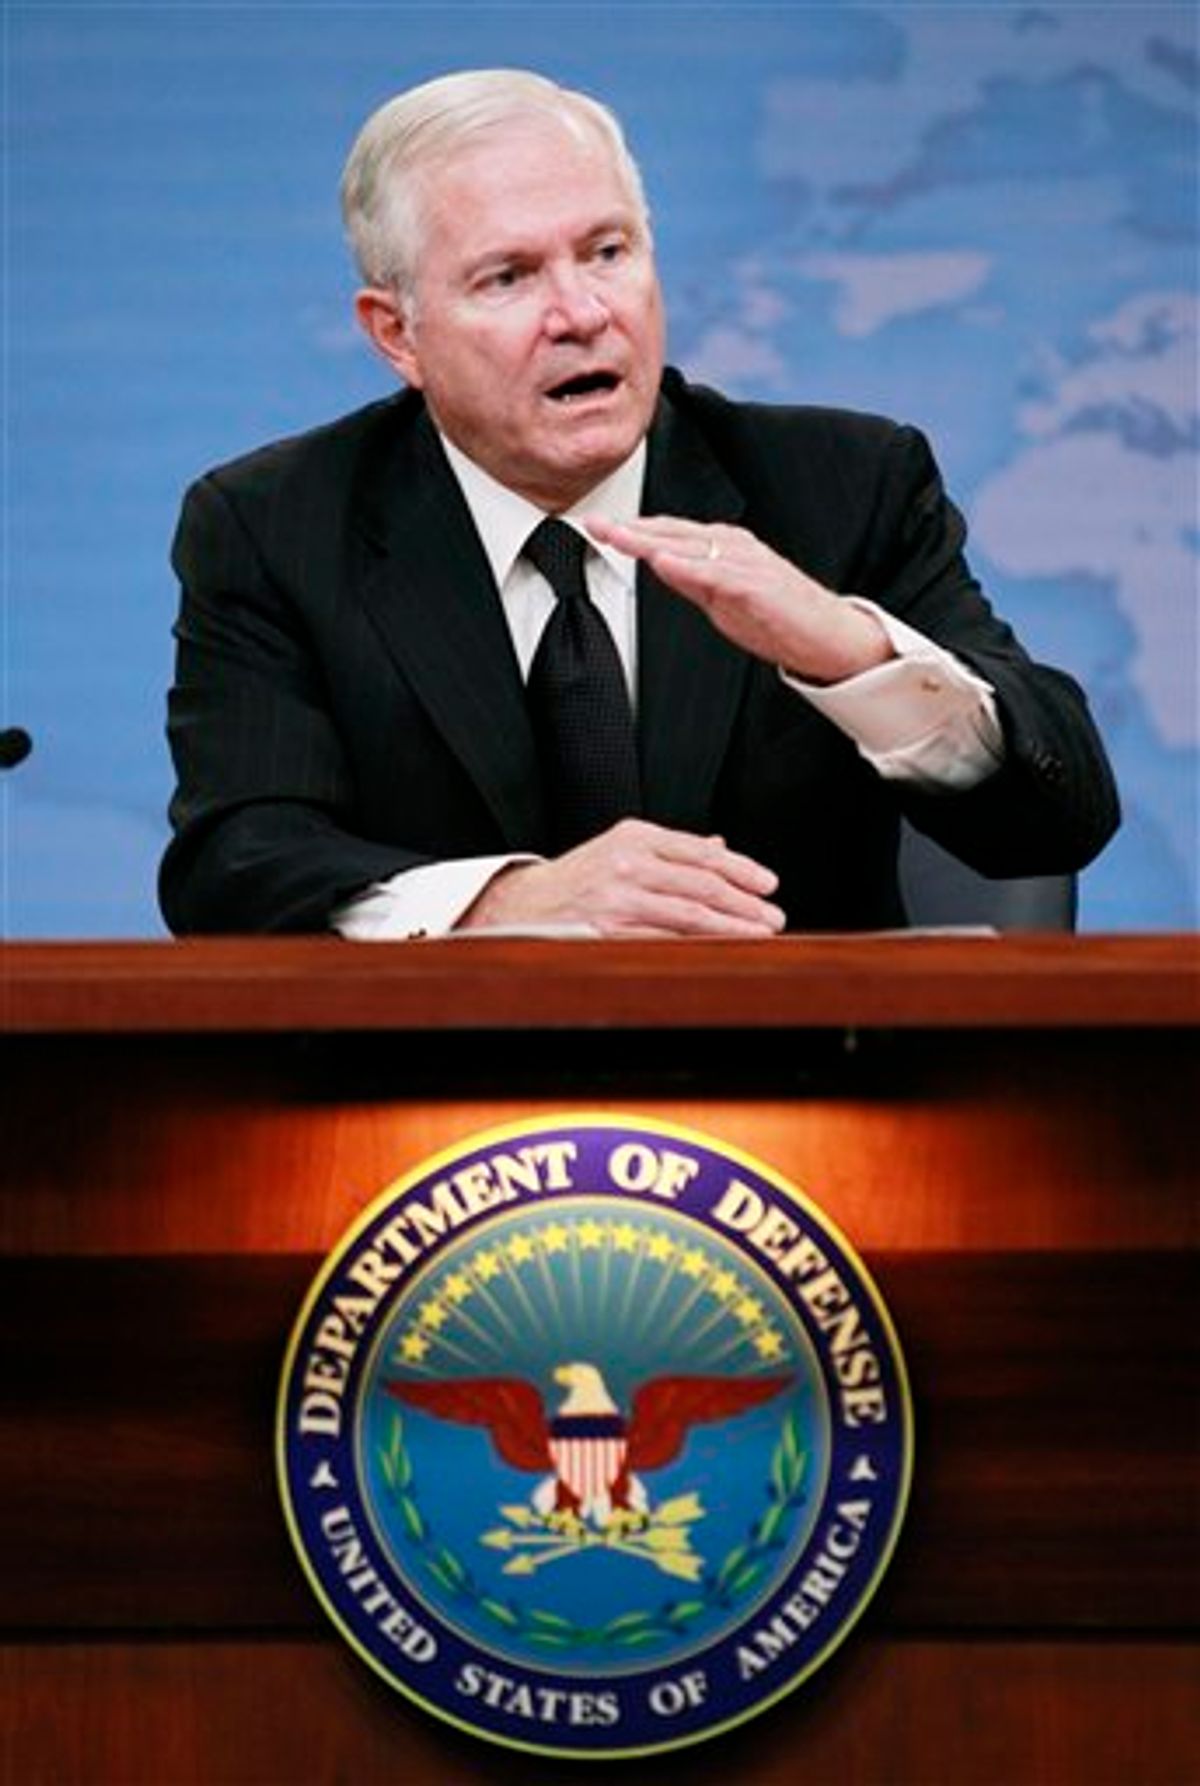 Secretary of Defense Robert Gates speaks at the Pentagon Monday, Aug. 9, 2010, in Washington. Gates said that tough economic times require that he shutter a major command that employs some 5,000 people in Norfolk, Va., and begin to eliminate other jobs throughout the military.  (AP Photo/Manuel Balce Ceneta)  (AP)